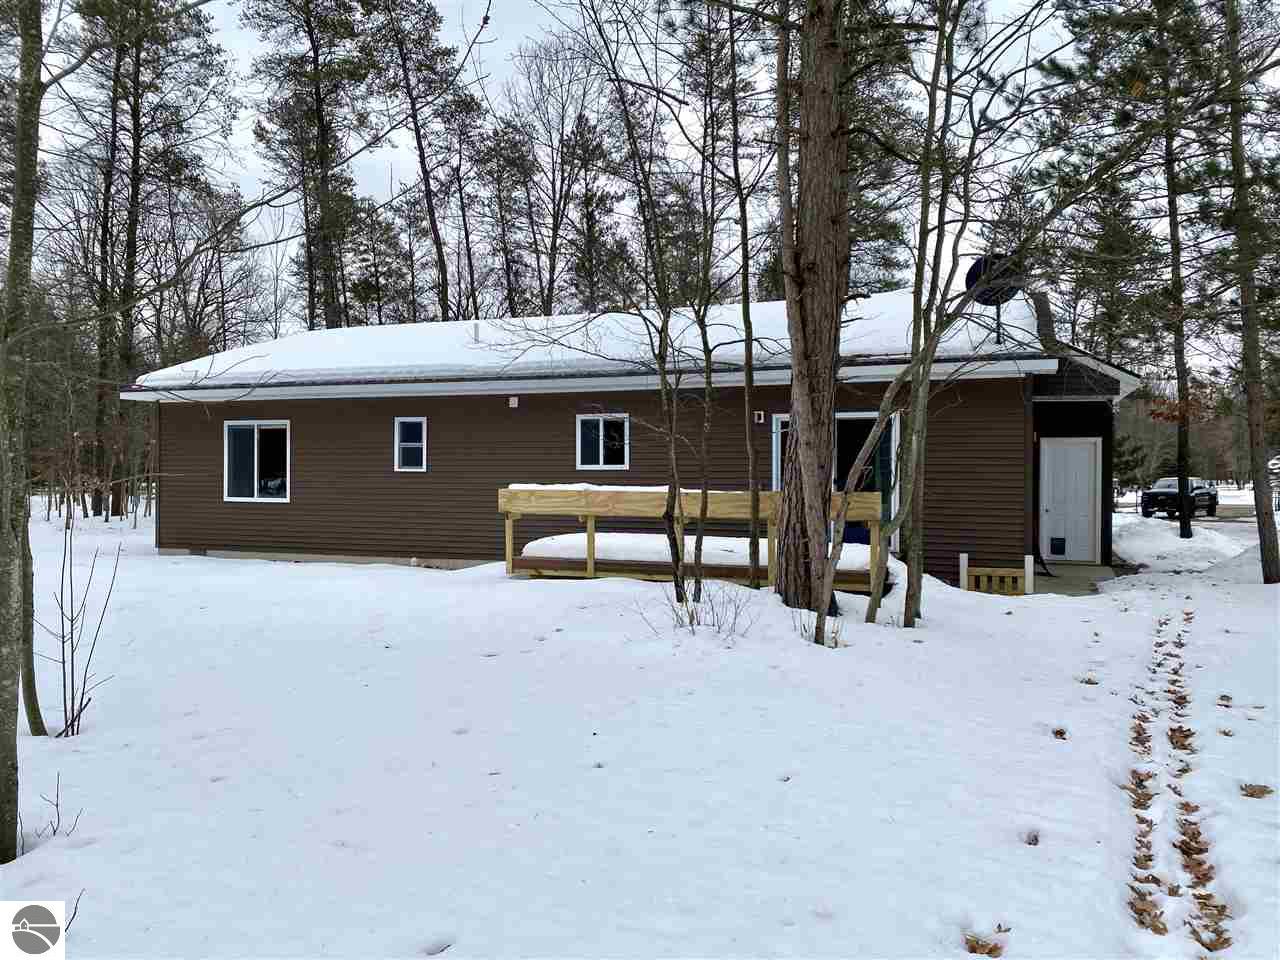 10360 W Rosted Road, Lake City, MI 49651 photo 37 of 52